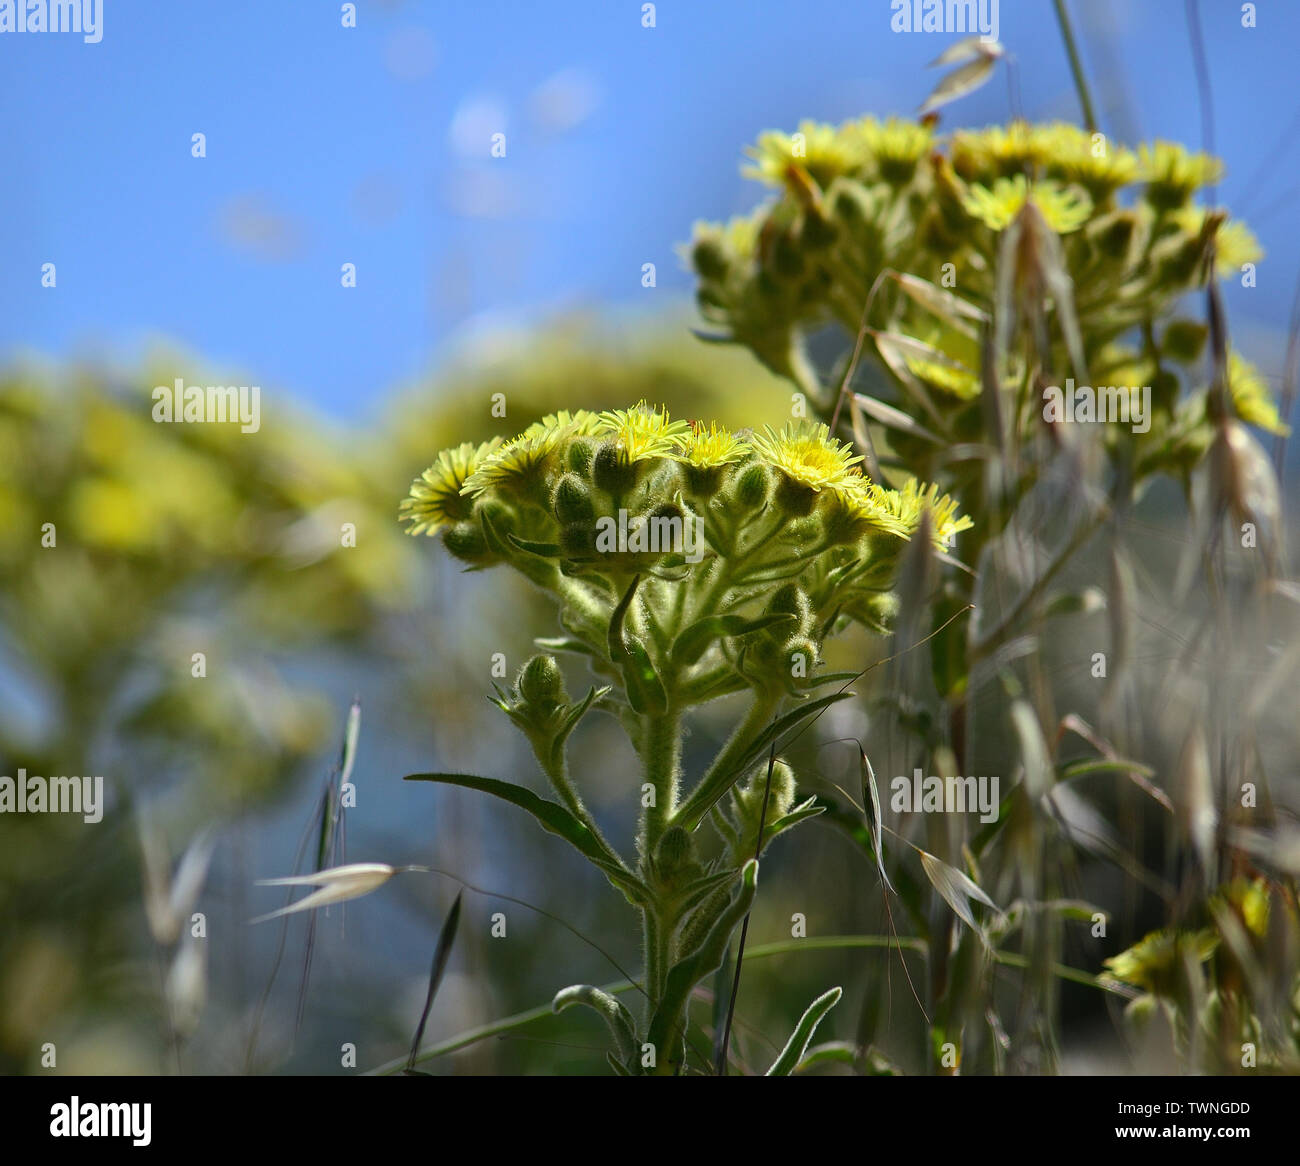 Plants of Senecio in full bloom and blue sky in the background Stock Photo